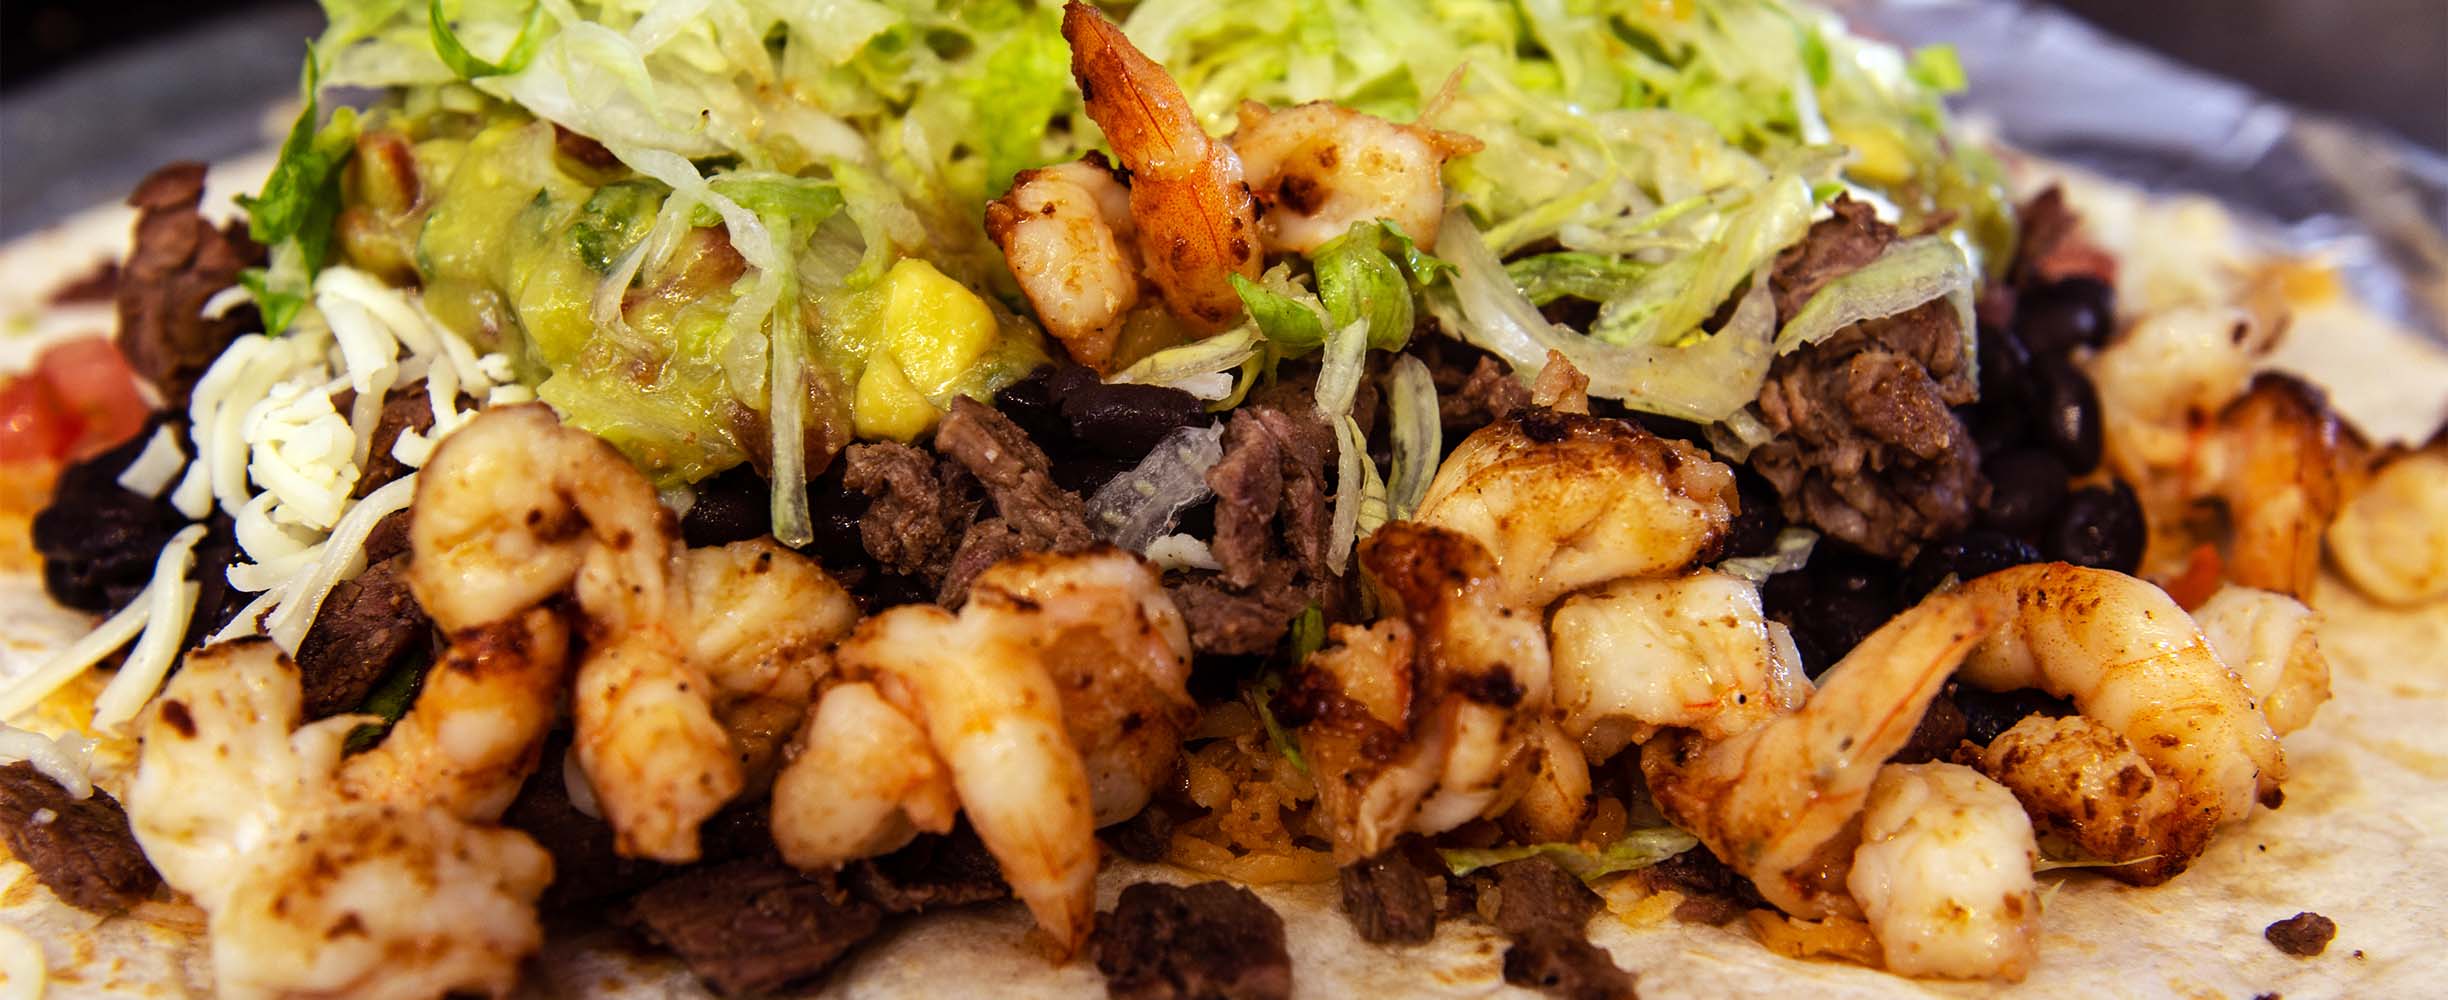 Shrimp and Beef Taco, just delicious!